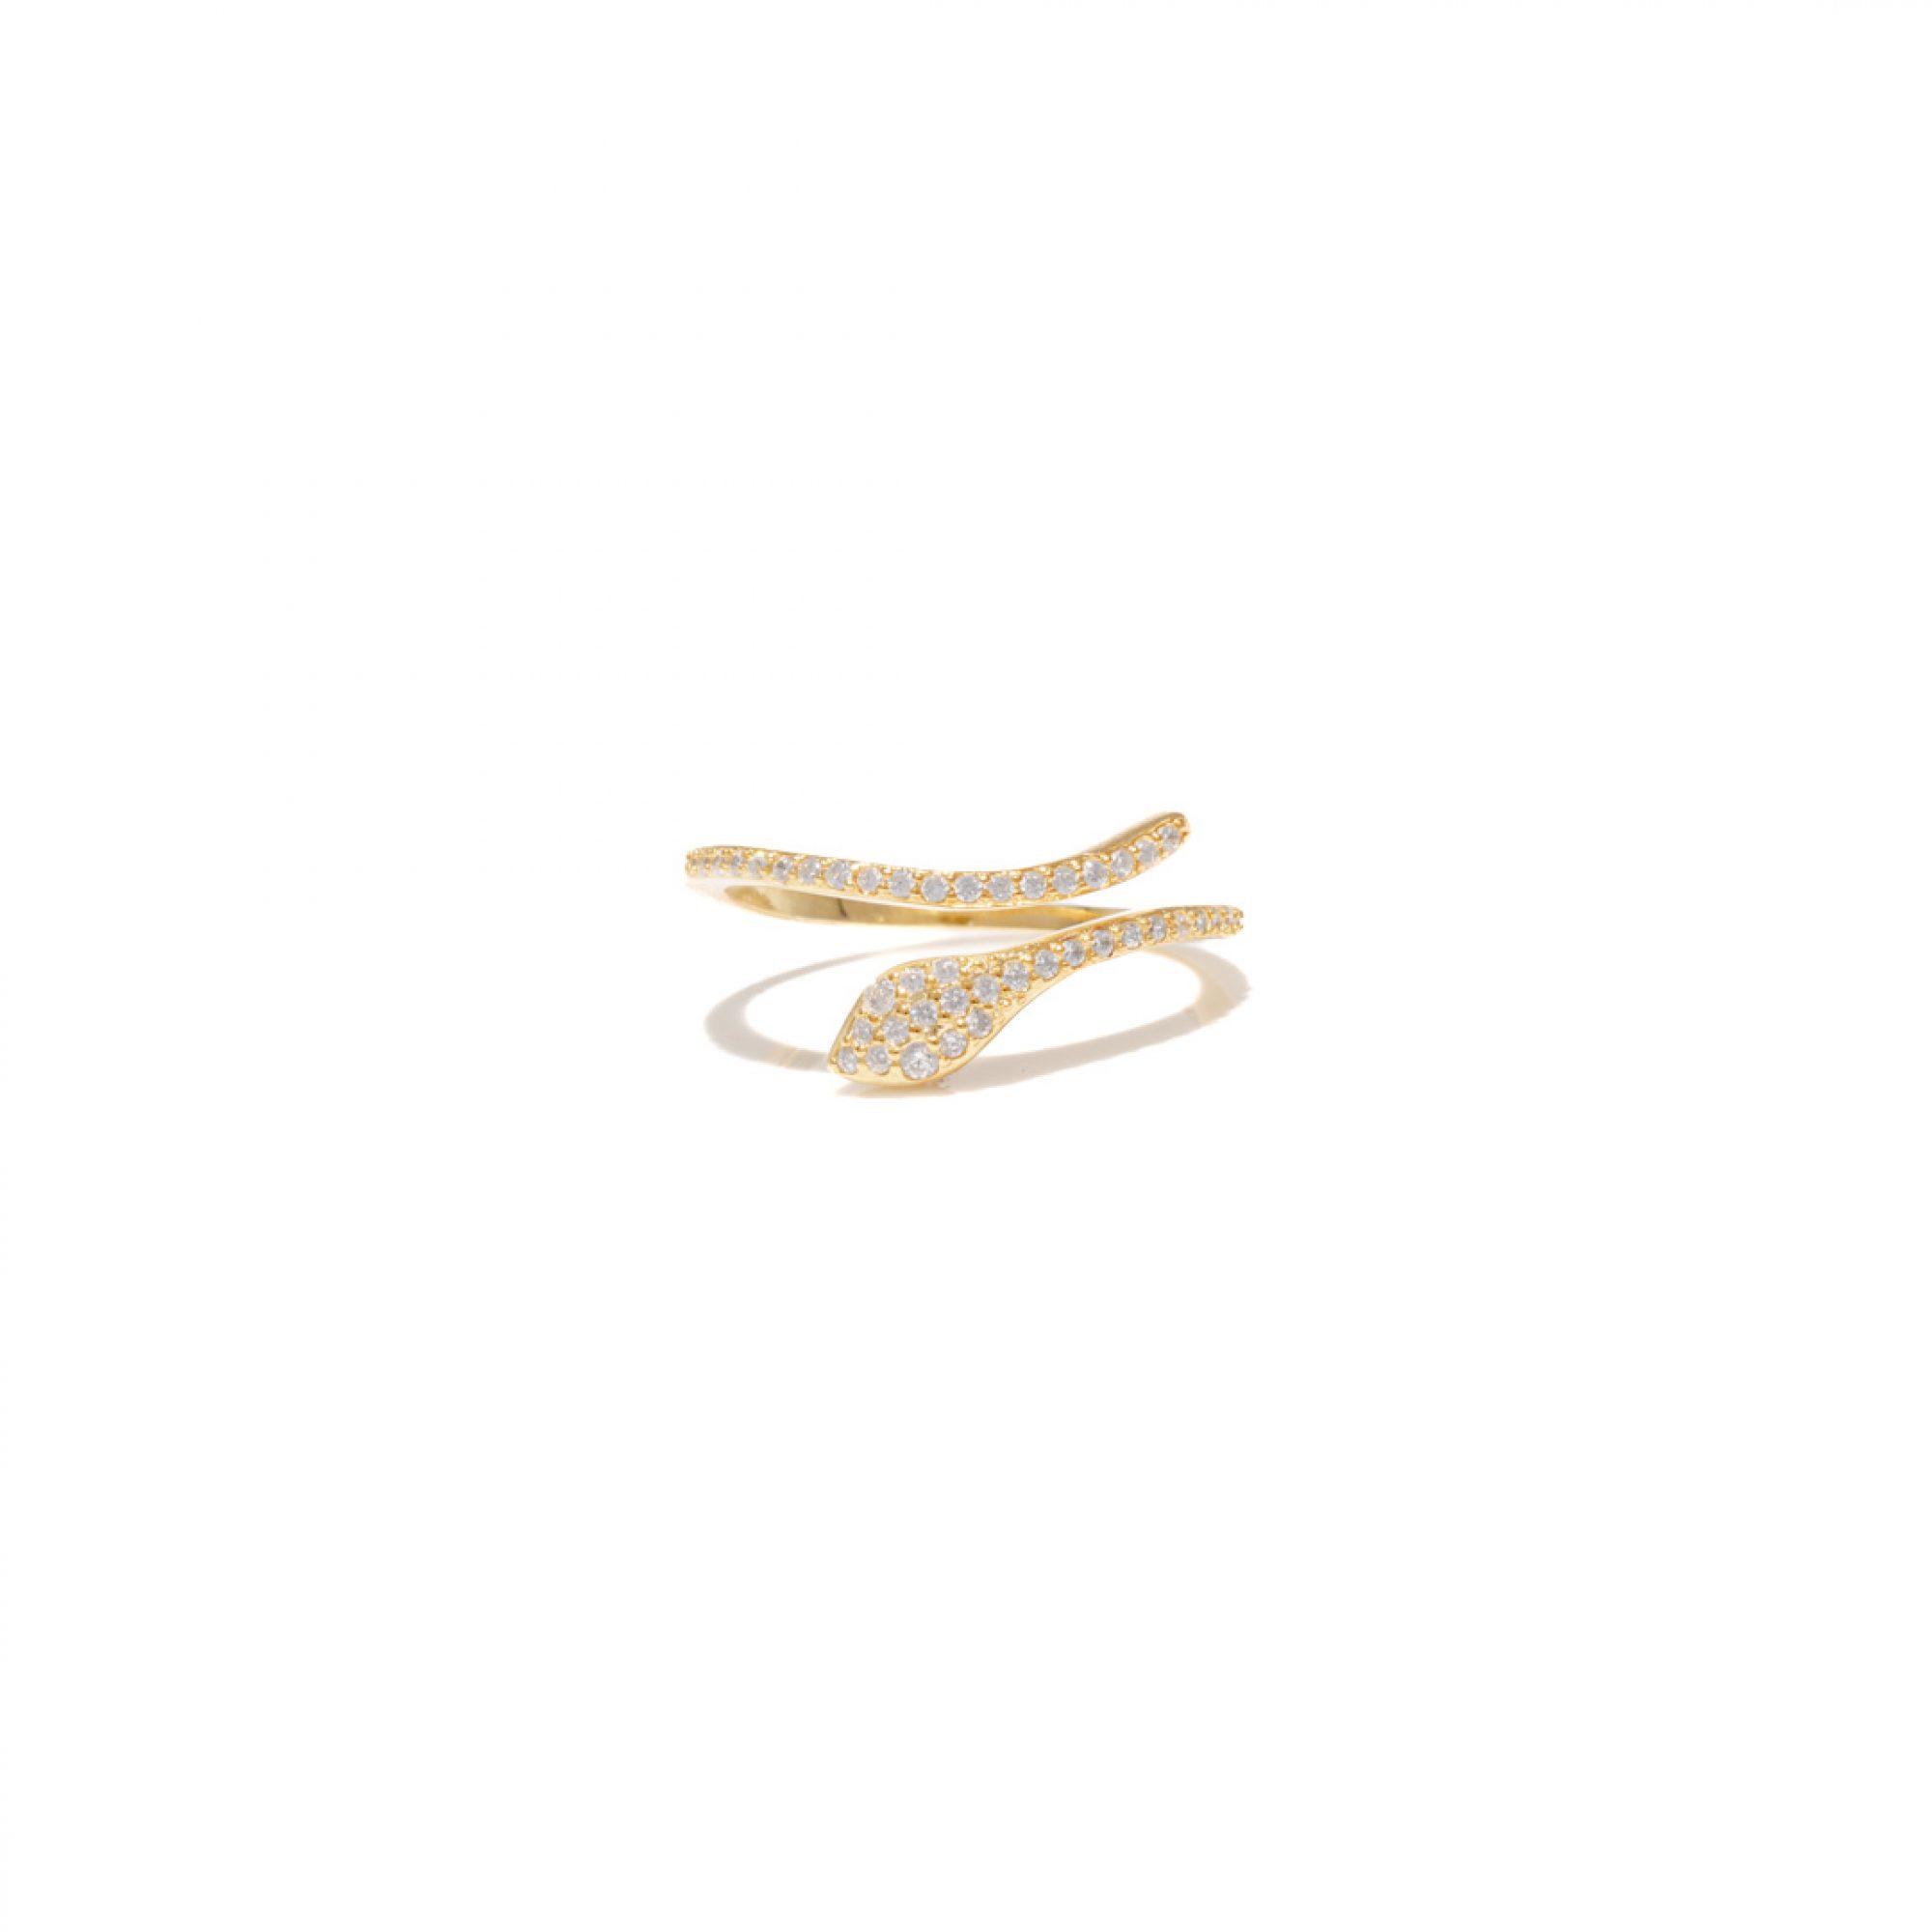 Gold plated snake ring with zircon stones